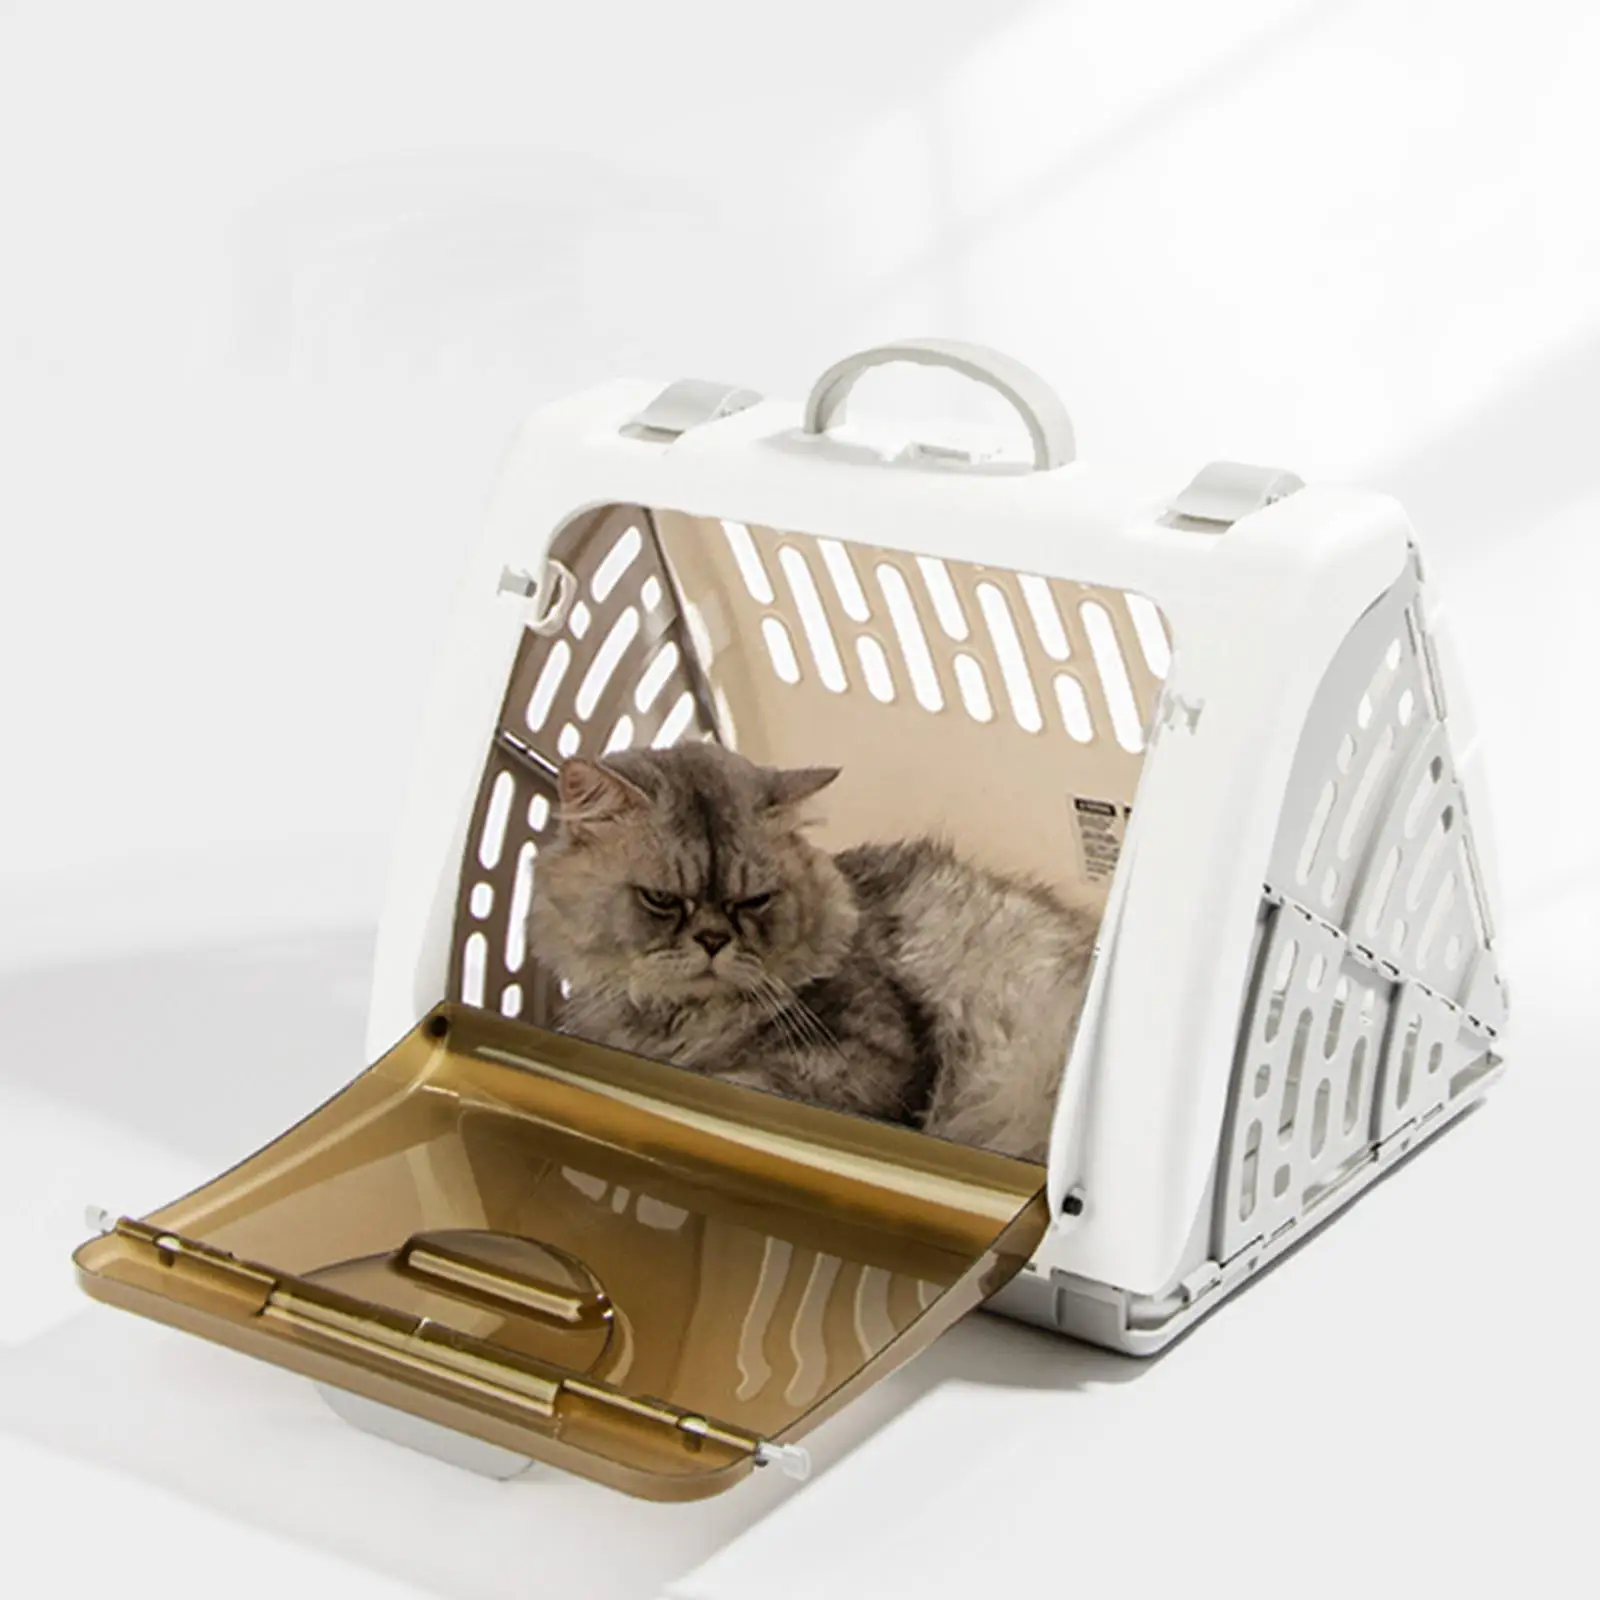 Foldable Pet Cat Carrier Dog Travel Bag Carrying Case Portable for Pets Grooming Shopping